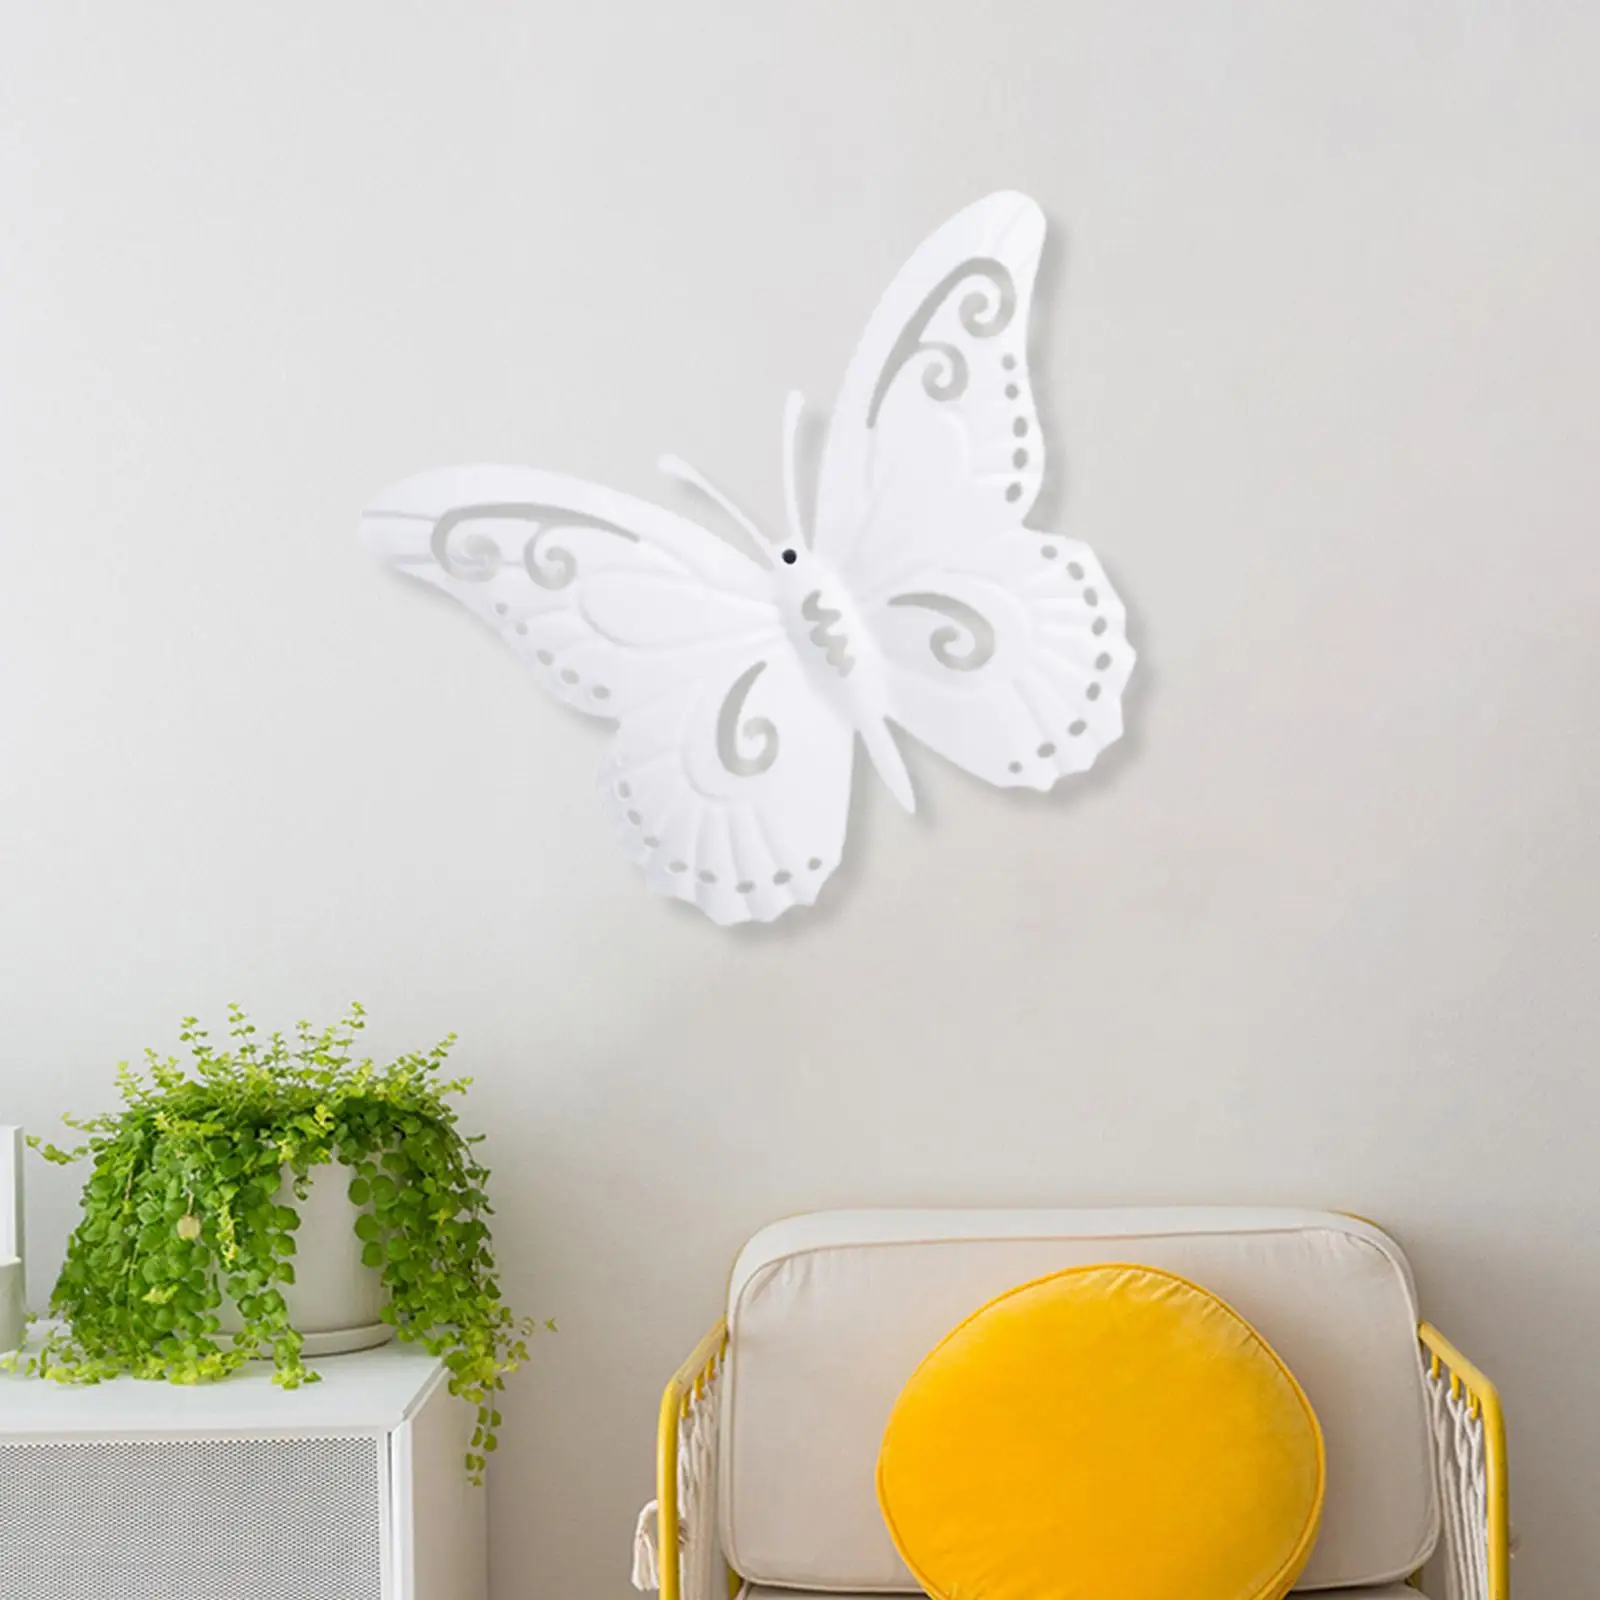 3D Butterfly Wall Decor Decorative Sculpture for Living Room Porch Bedroom